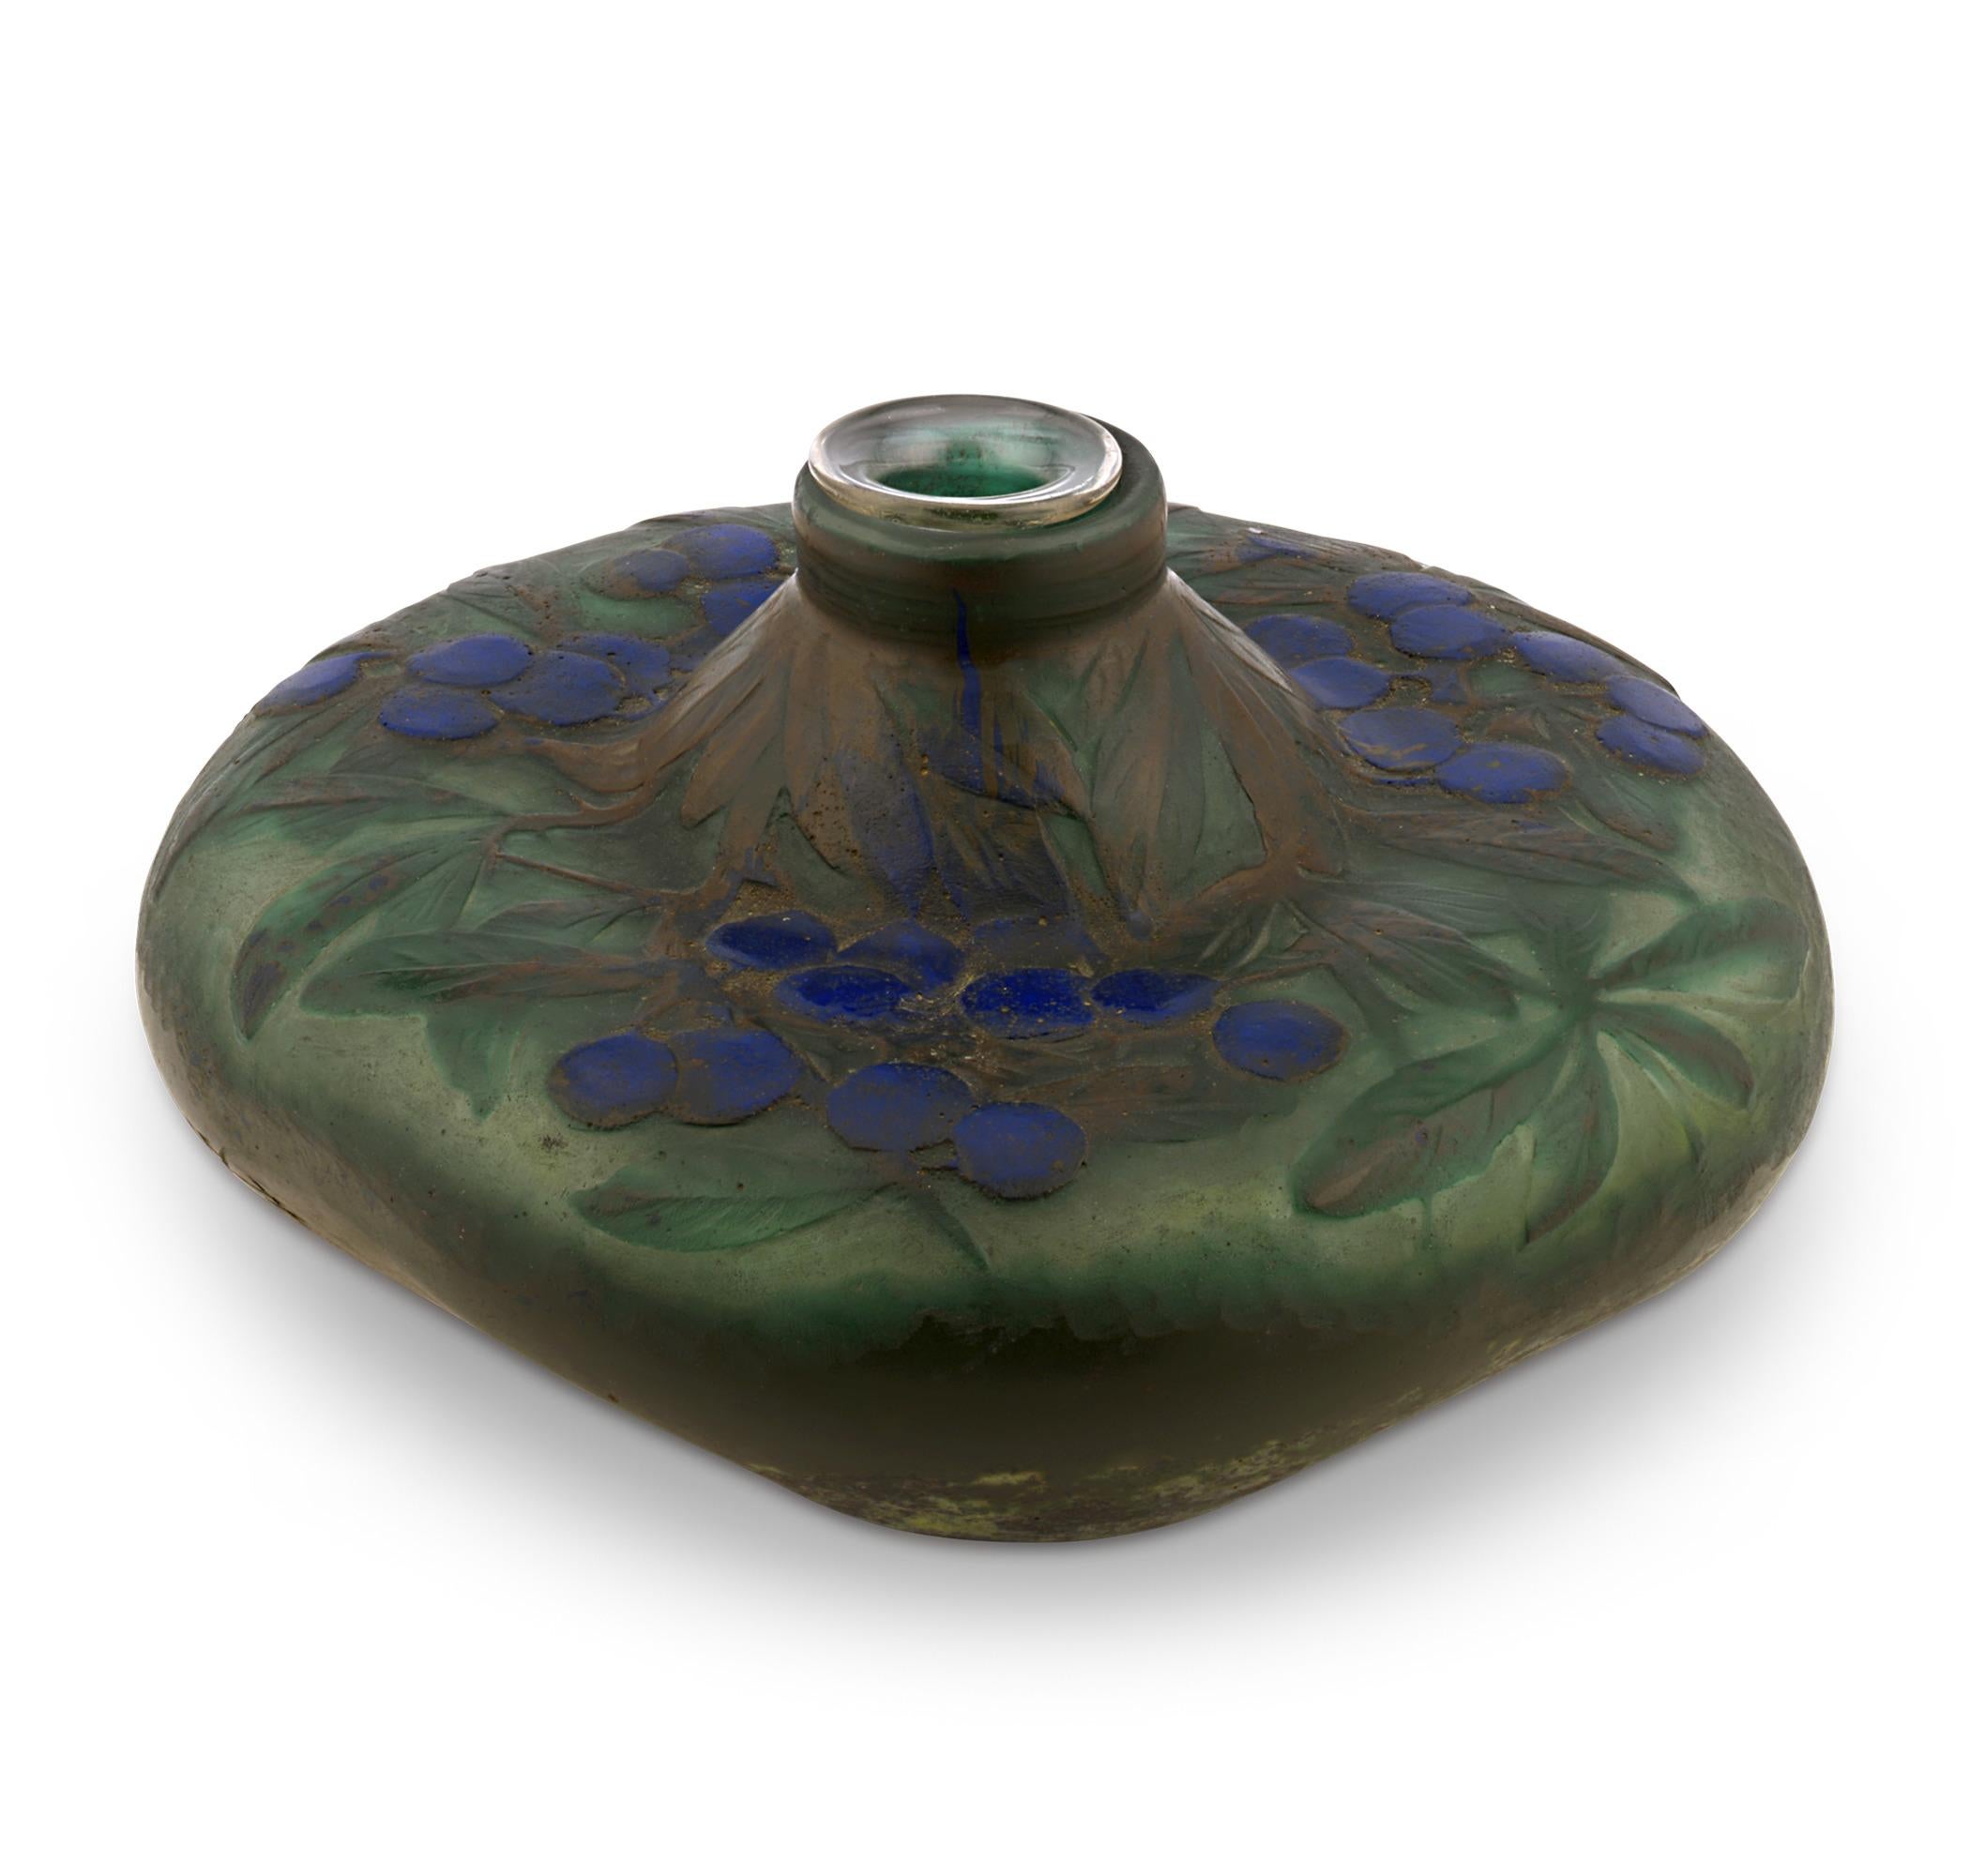 This beautiful cameo glass inkwell displays the brilliance of the renowned Daum Nancy, a firm long celebrated for their masterful ability to recreate the beauty of nature in glass. A delightful array of vibrant blueberries adorn the top of this